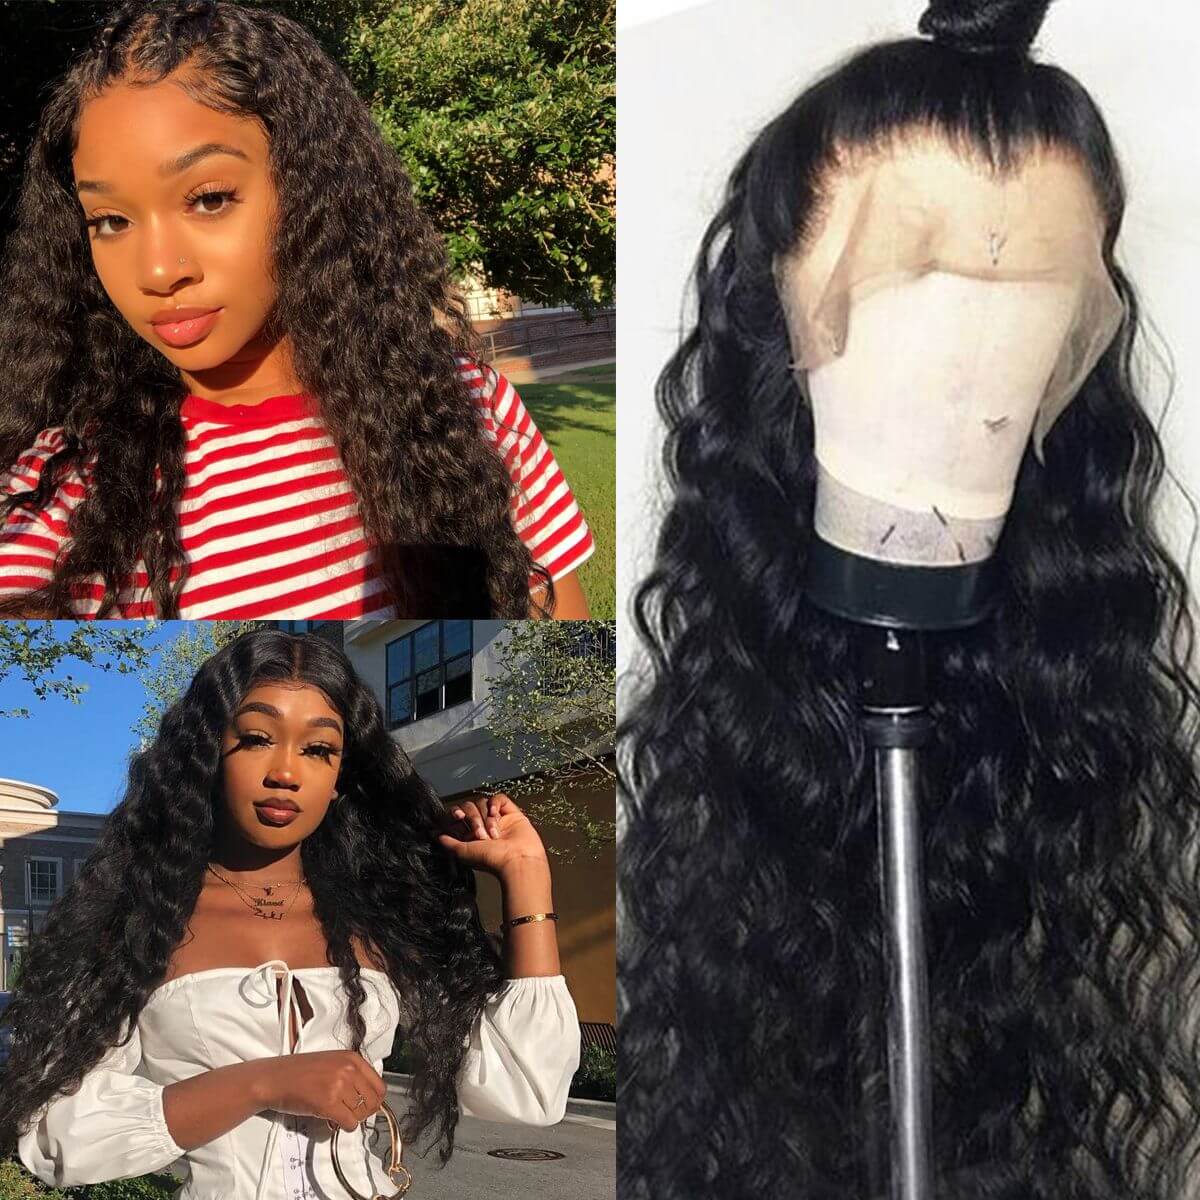 loose wave full lace wig,loose wave full wig,full lace loose wig,loose full lace wig,loose full lace human wig,lace full loose wave wig